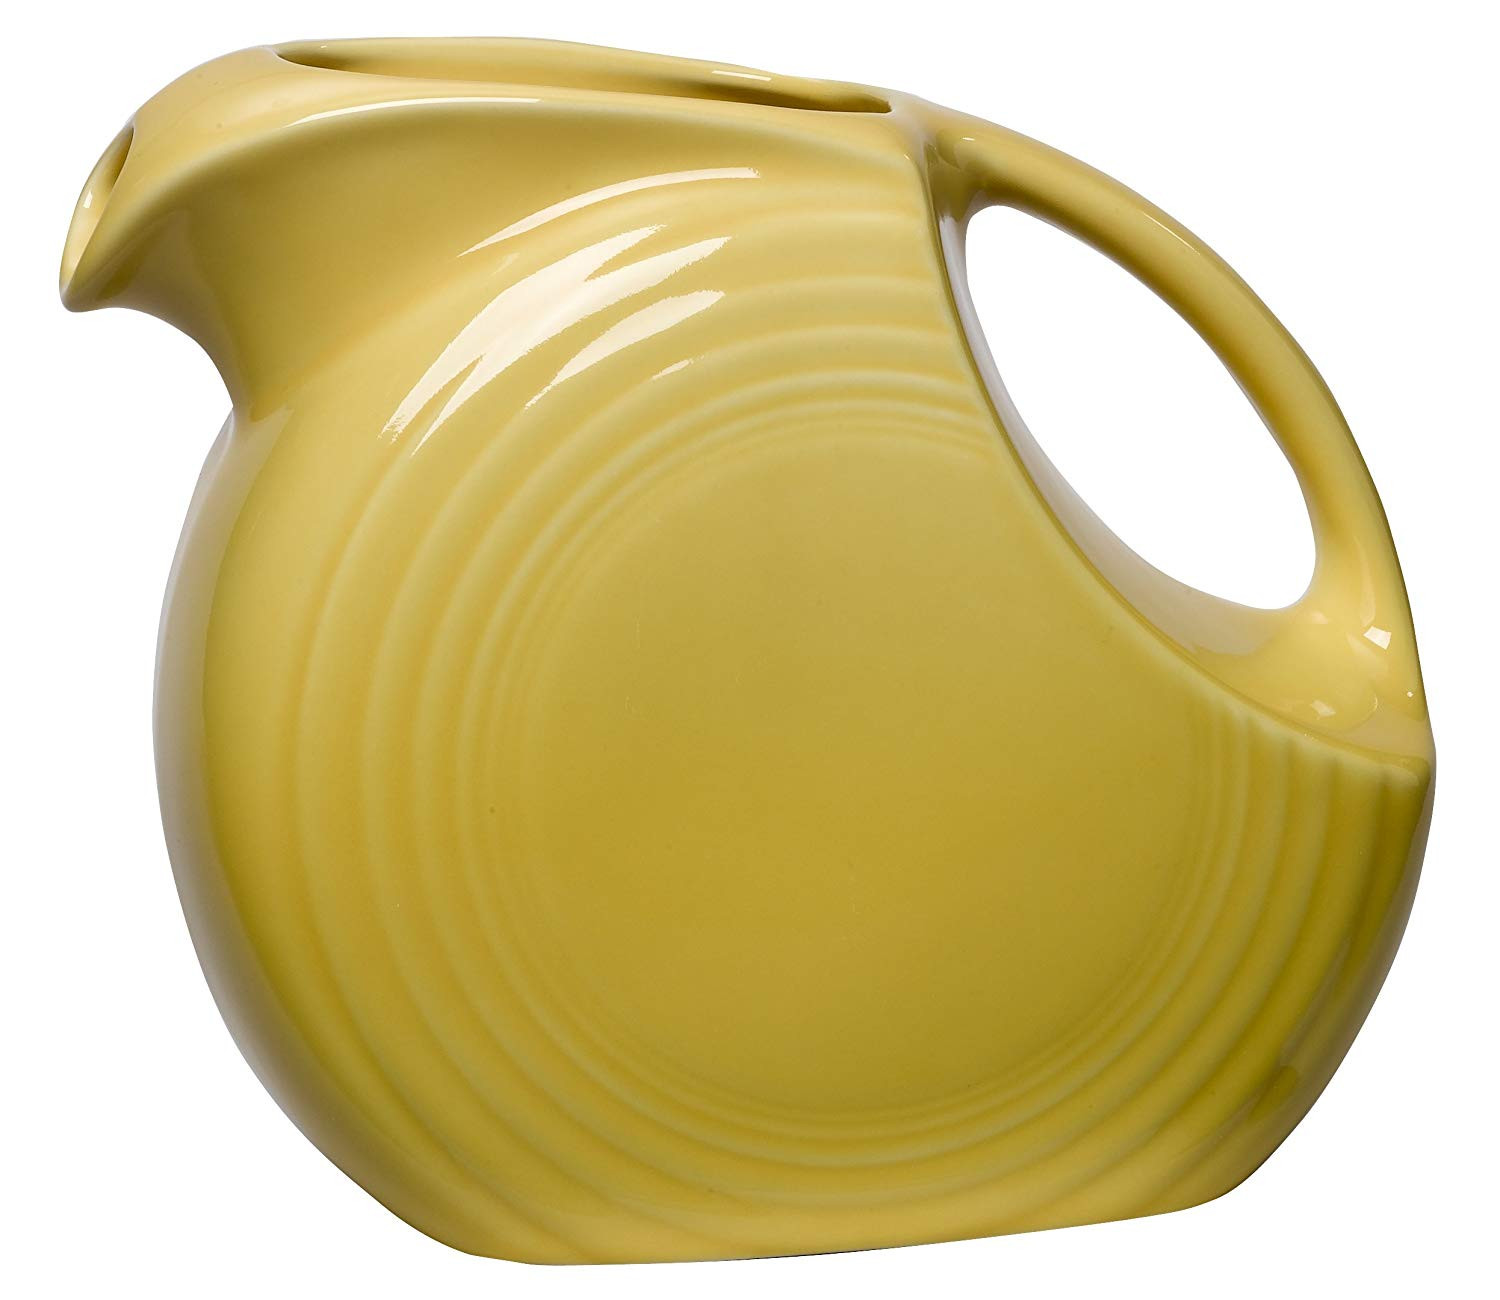 23 Famous Fiestaware Vase Prices 2024 free download fiestaware vase prices of amazon com fiesta 67 1 4 ounce large disk pitcher sunflower throughout amazon com fiesta 67 1 4 ounce large disk pitcher sunflower fiestaware pitcher carafes pitche